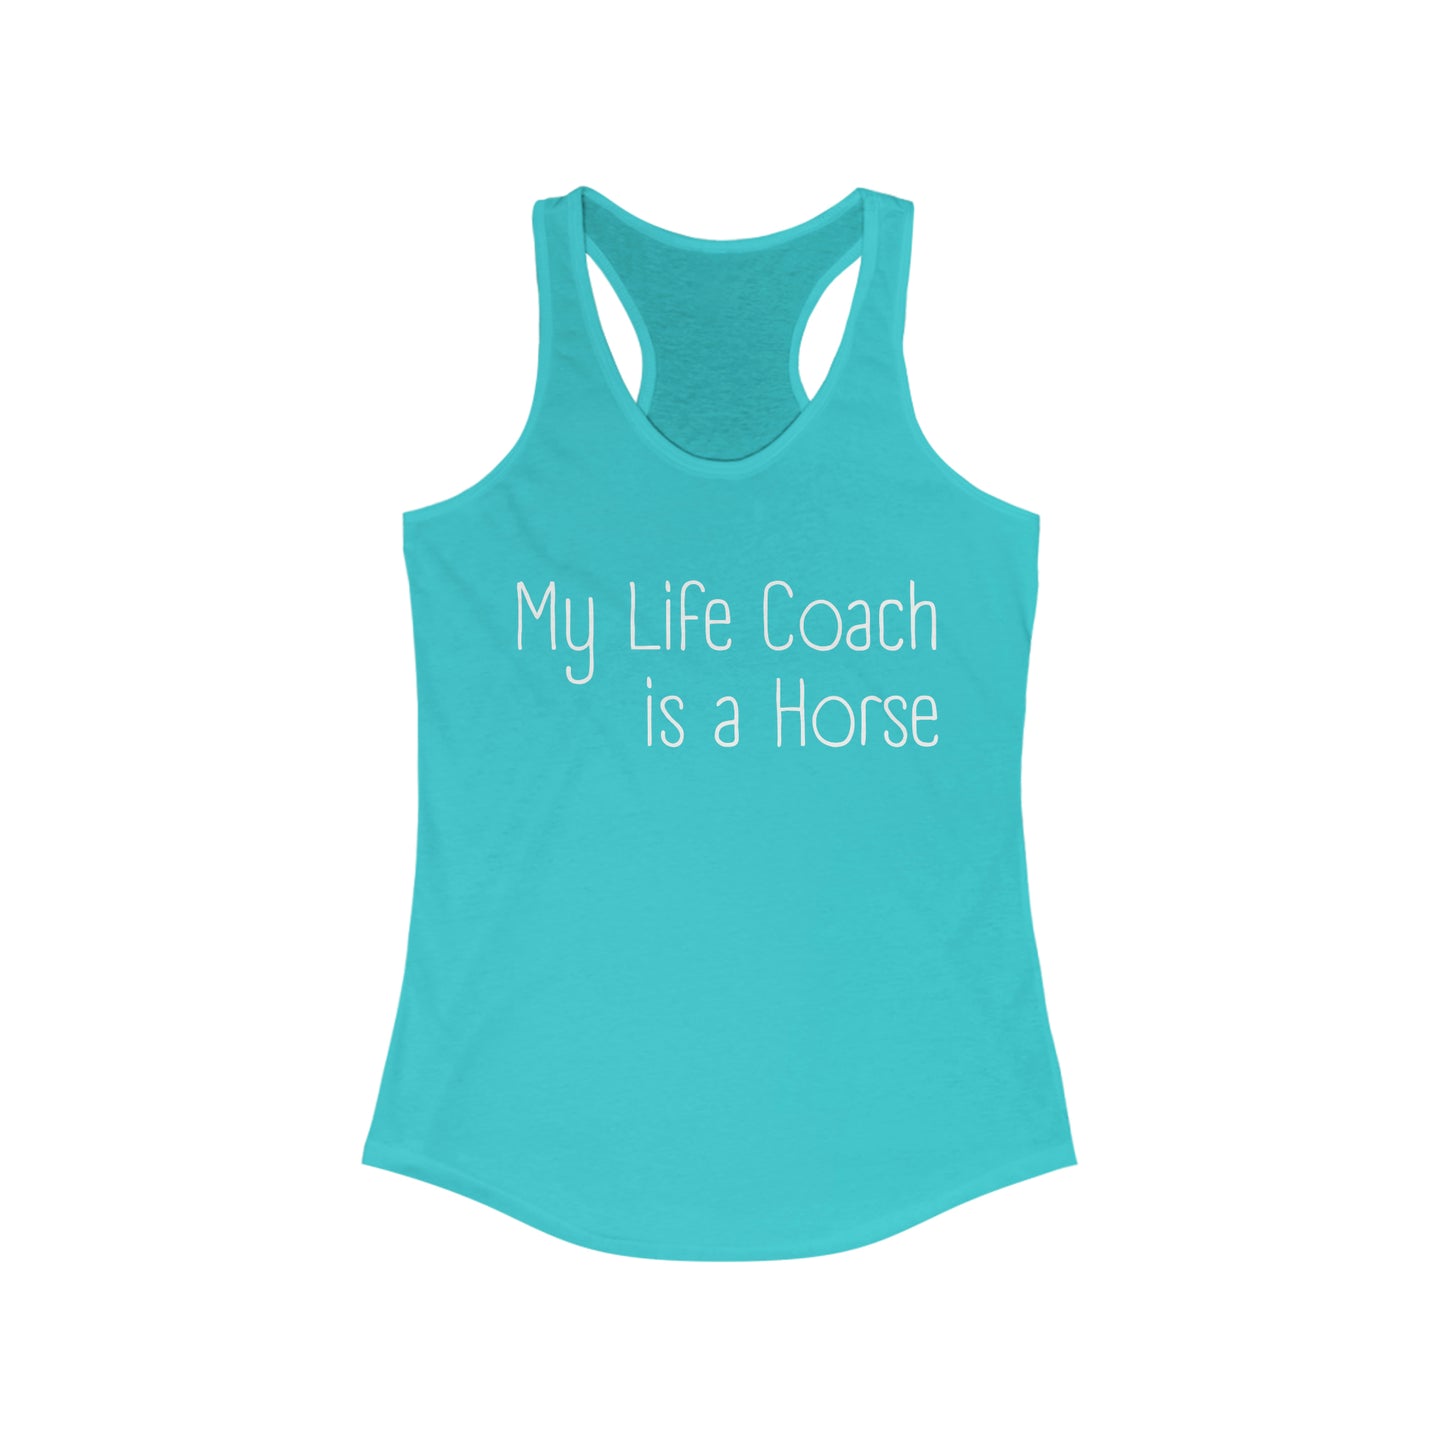 My Life Coach is a Horse Tank